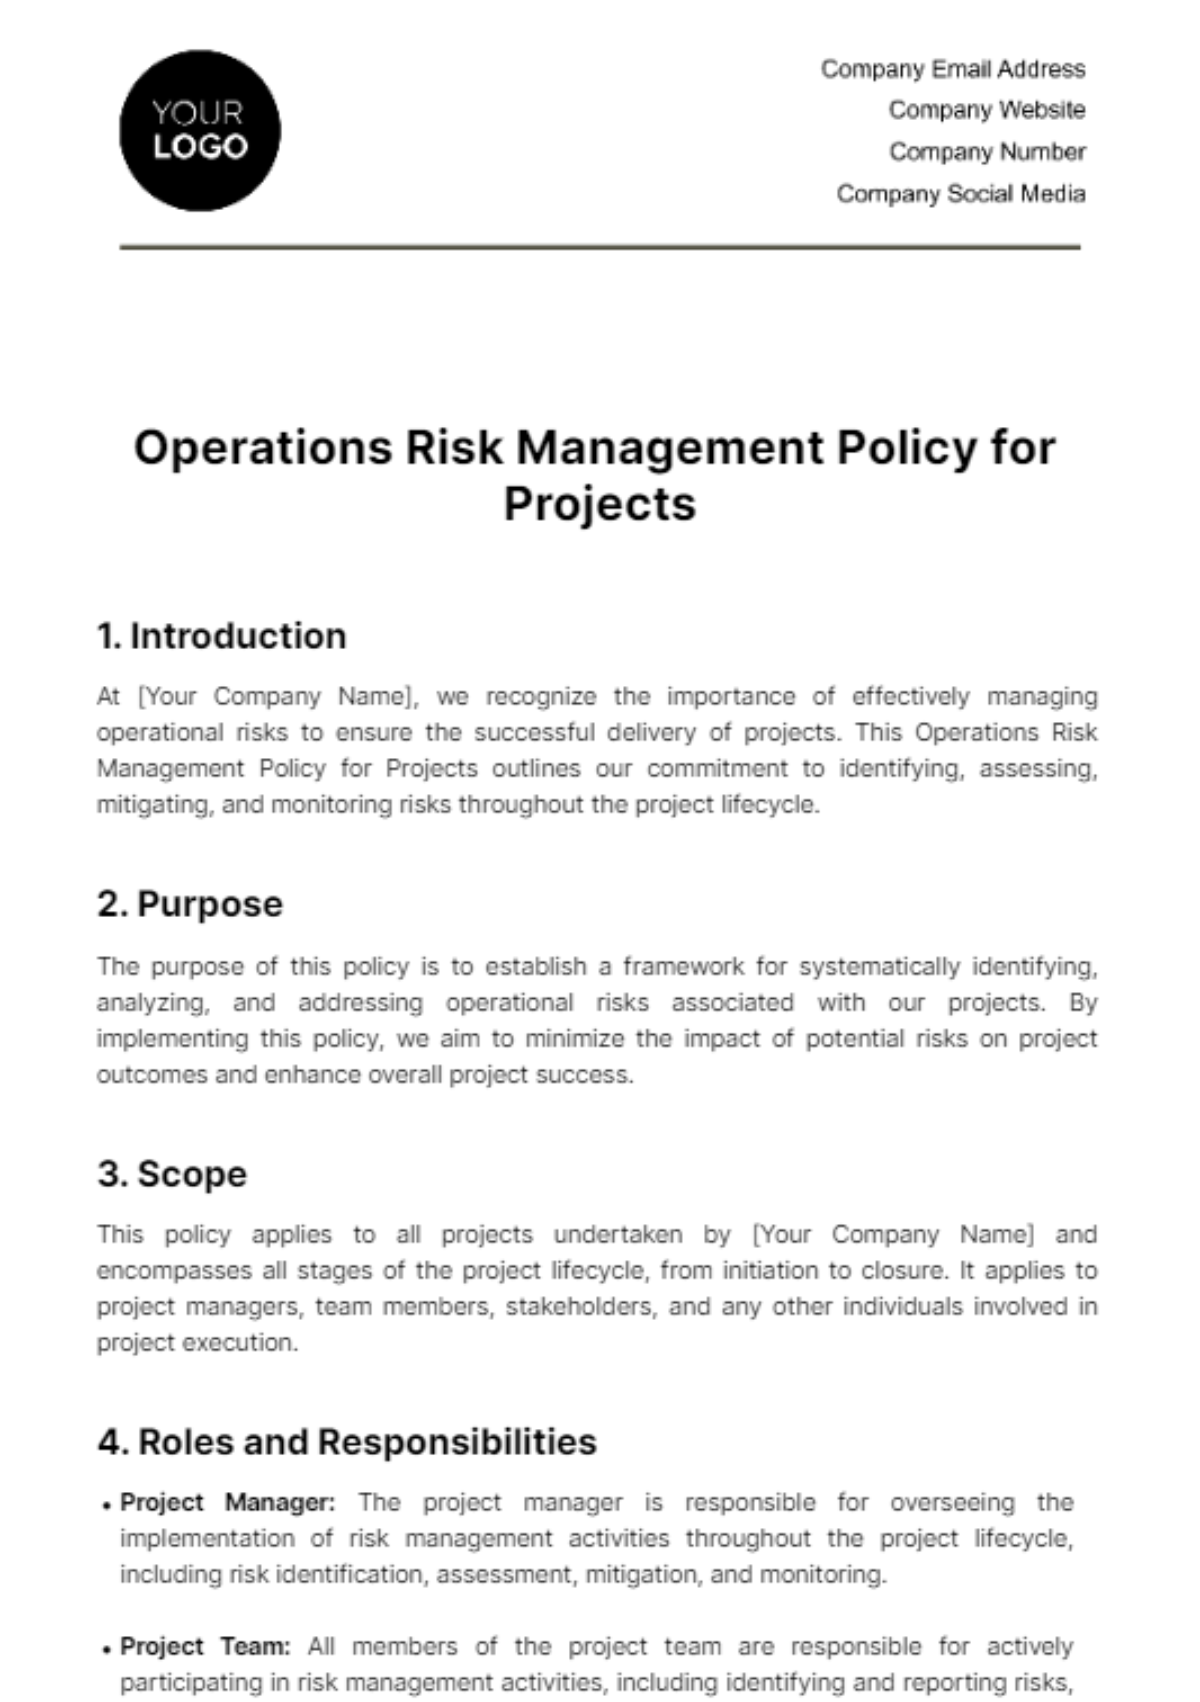 Free Operations Risk Management Policy for Projects Template